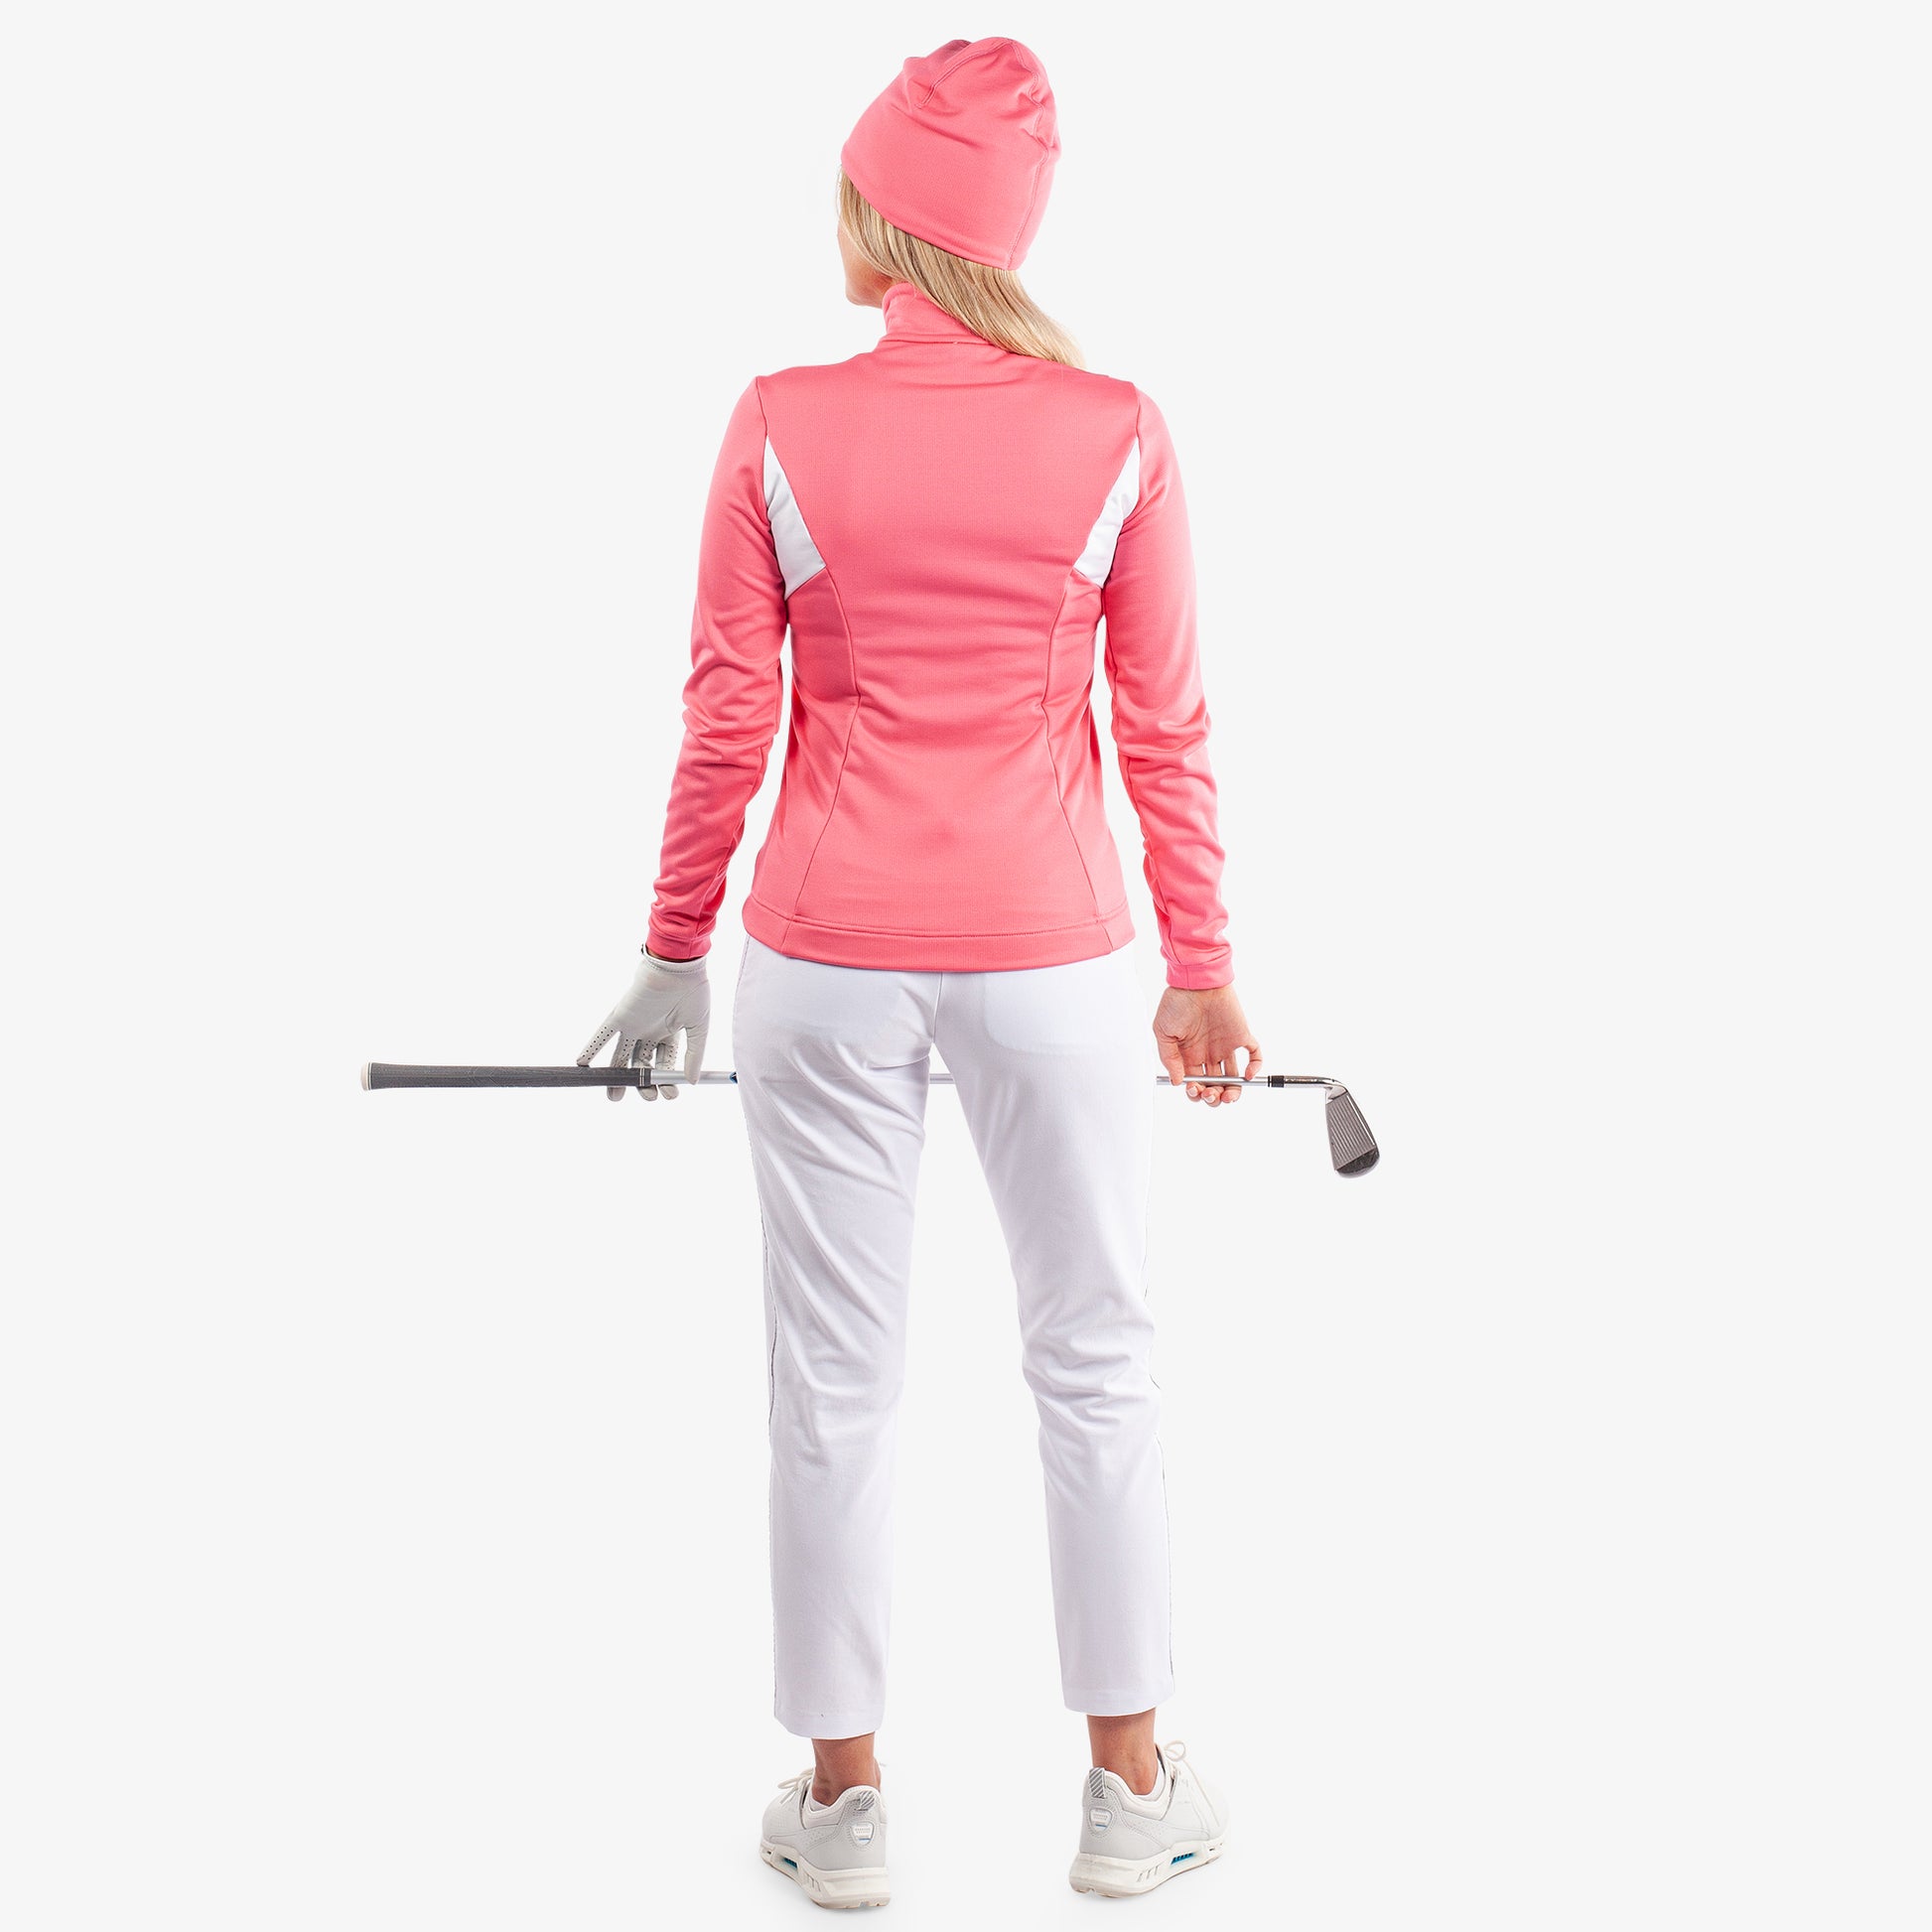 Galvin Green Ladies INSULA Jacket with Shaped Contrast Panels in Camelia Rose & White